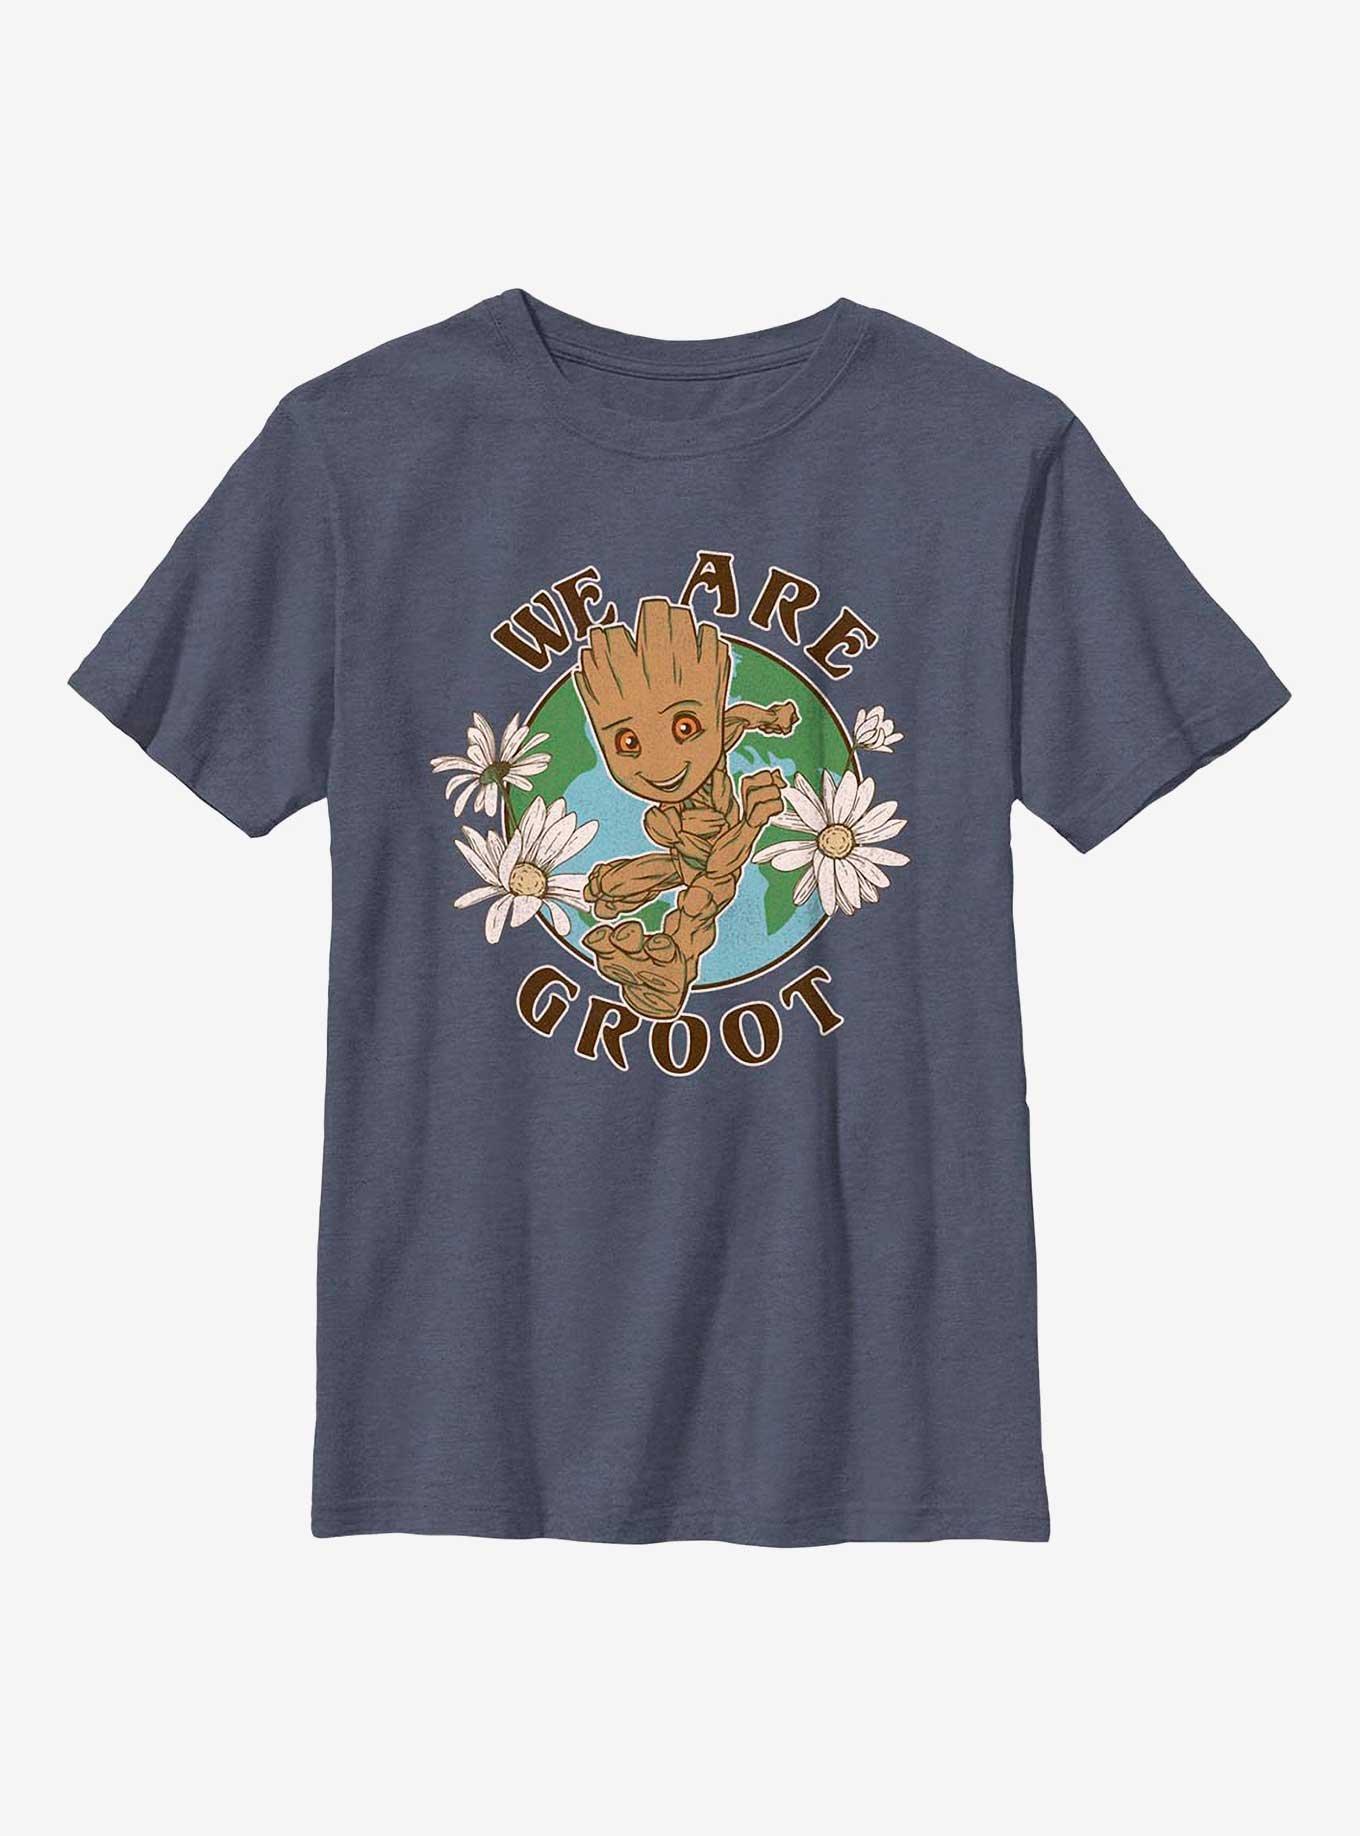 Marvel Guardians Of The Galaxy Groot Earth Day Youth T-Shirt, NAVY HTR, hi-res